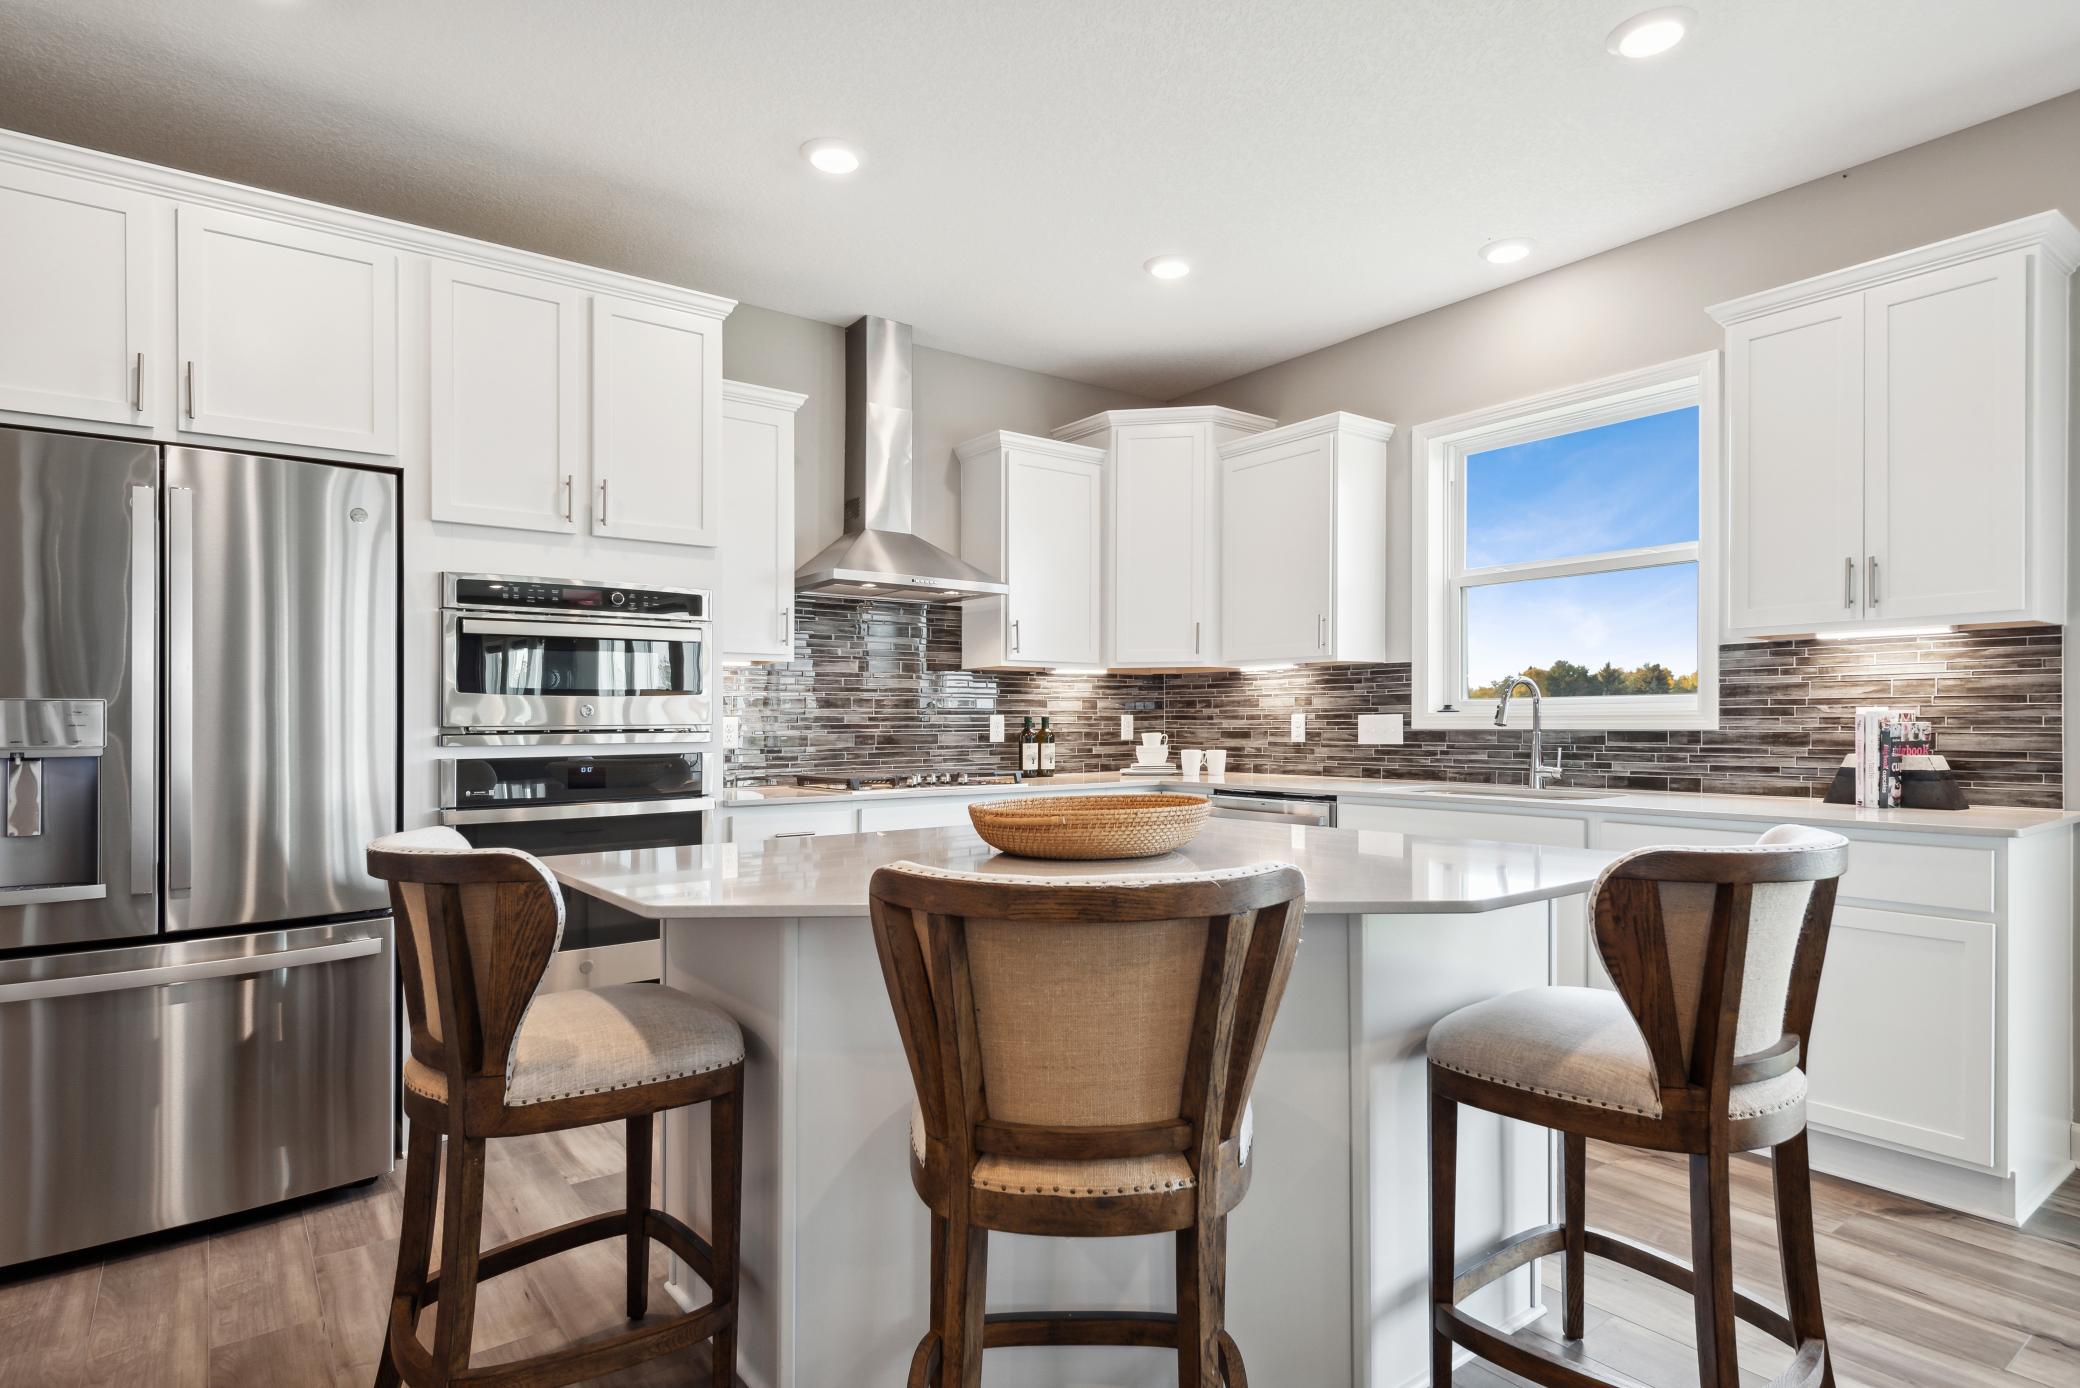 (Photo of a decorated model, actual homes finishes will vary) Welcome! Your beautiful new 4 bedroom - 3 bath modernly designed home awaits! Stunning upgraded features throughout, grand open floor plan, a 3 car garage plus so much more!